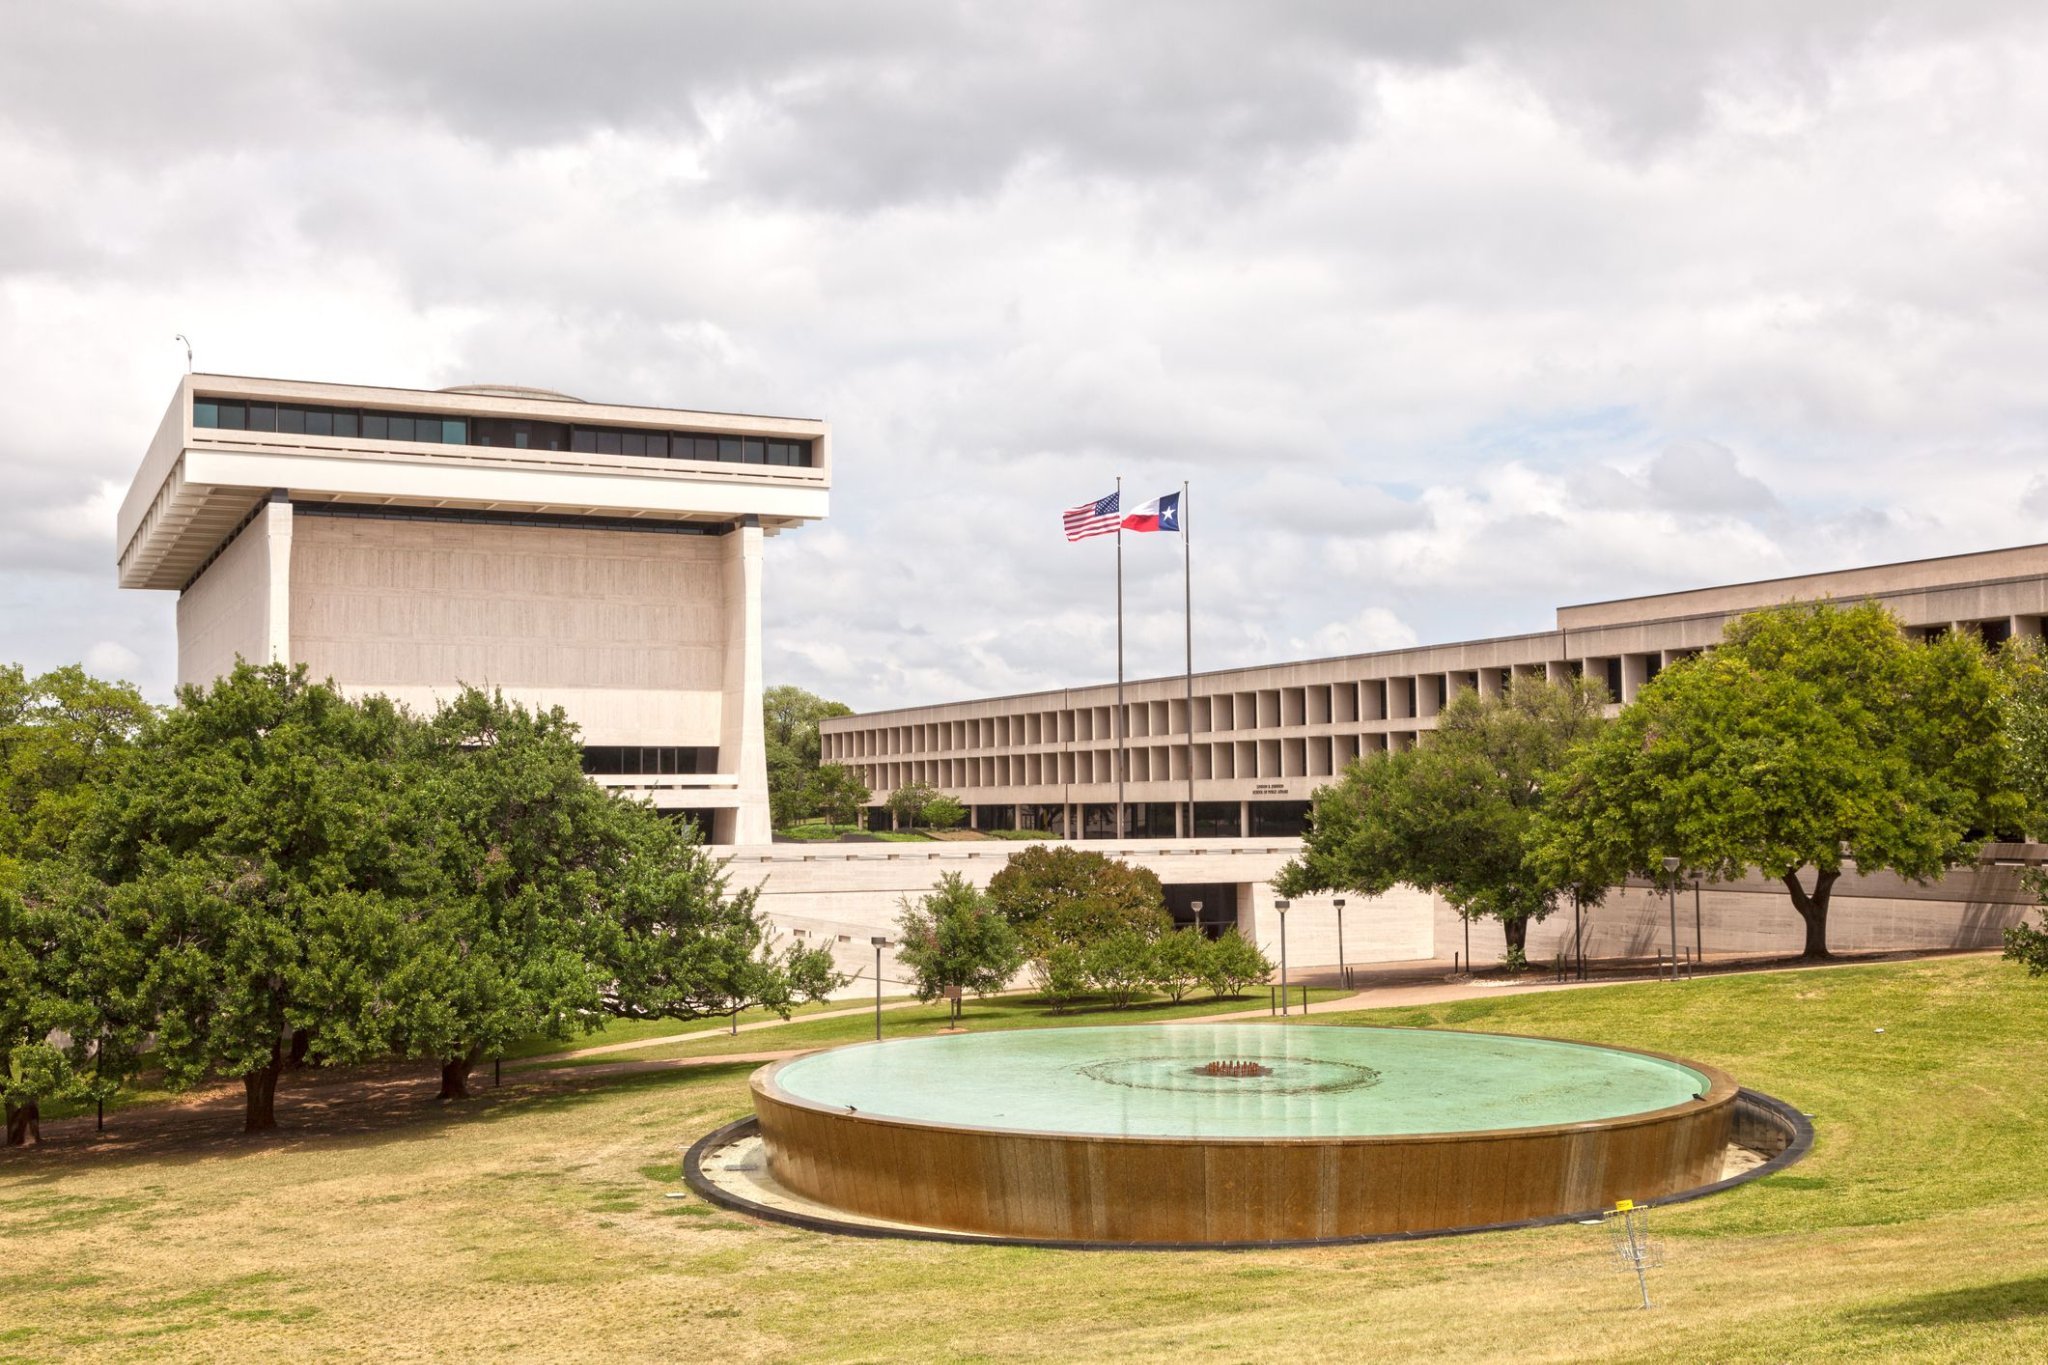 The Complete Guide to the LBJ Presidential Library